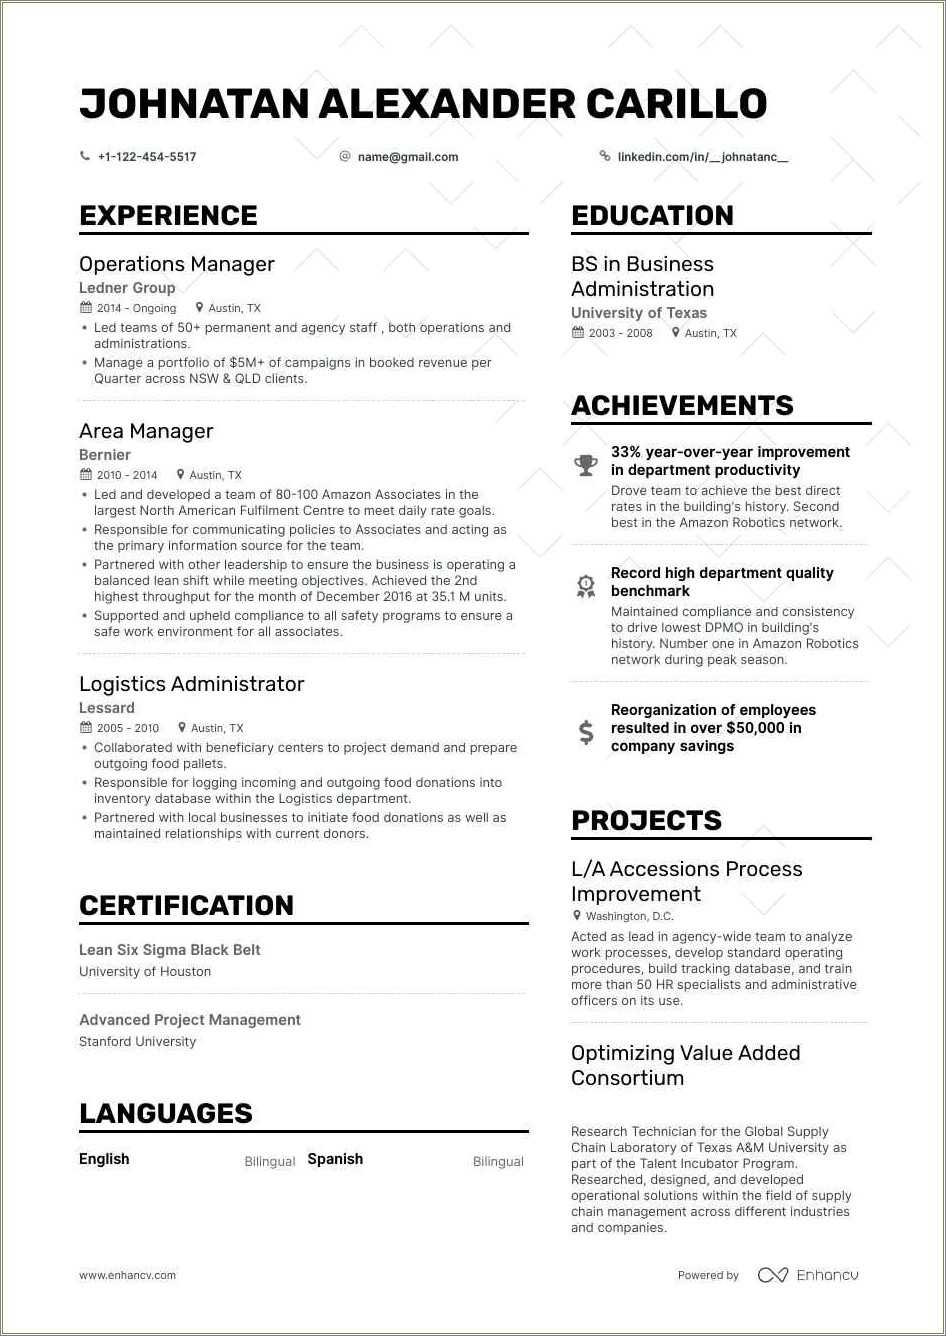 Professional Summary For Resume Operations Manager